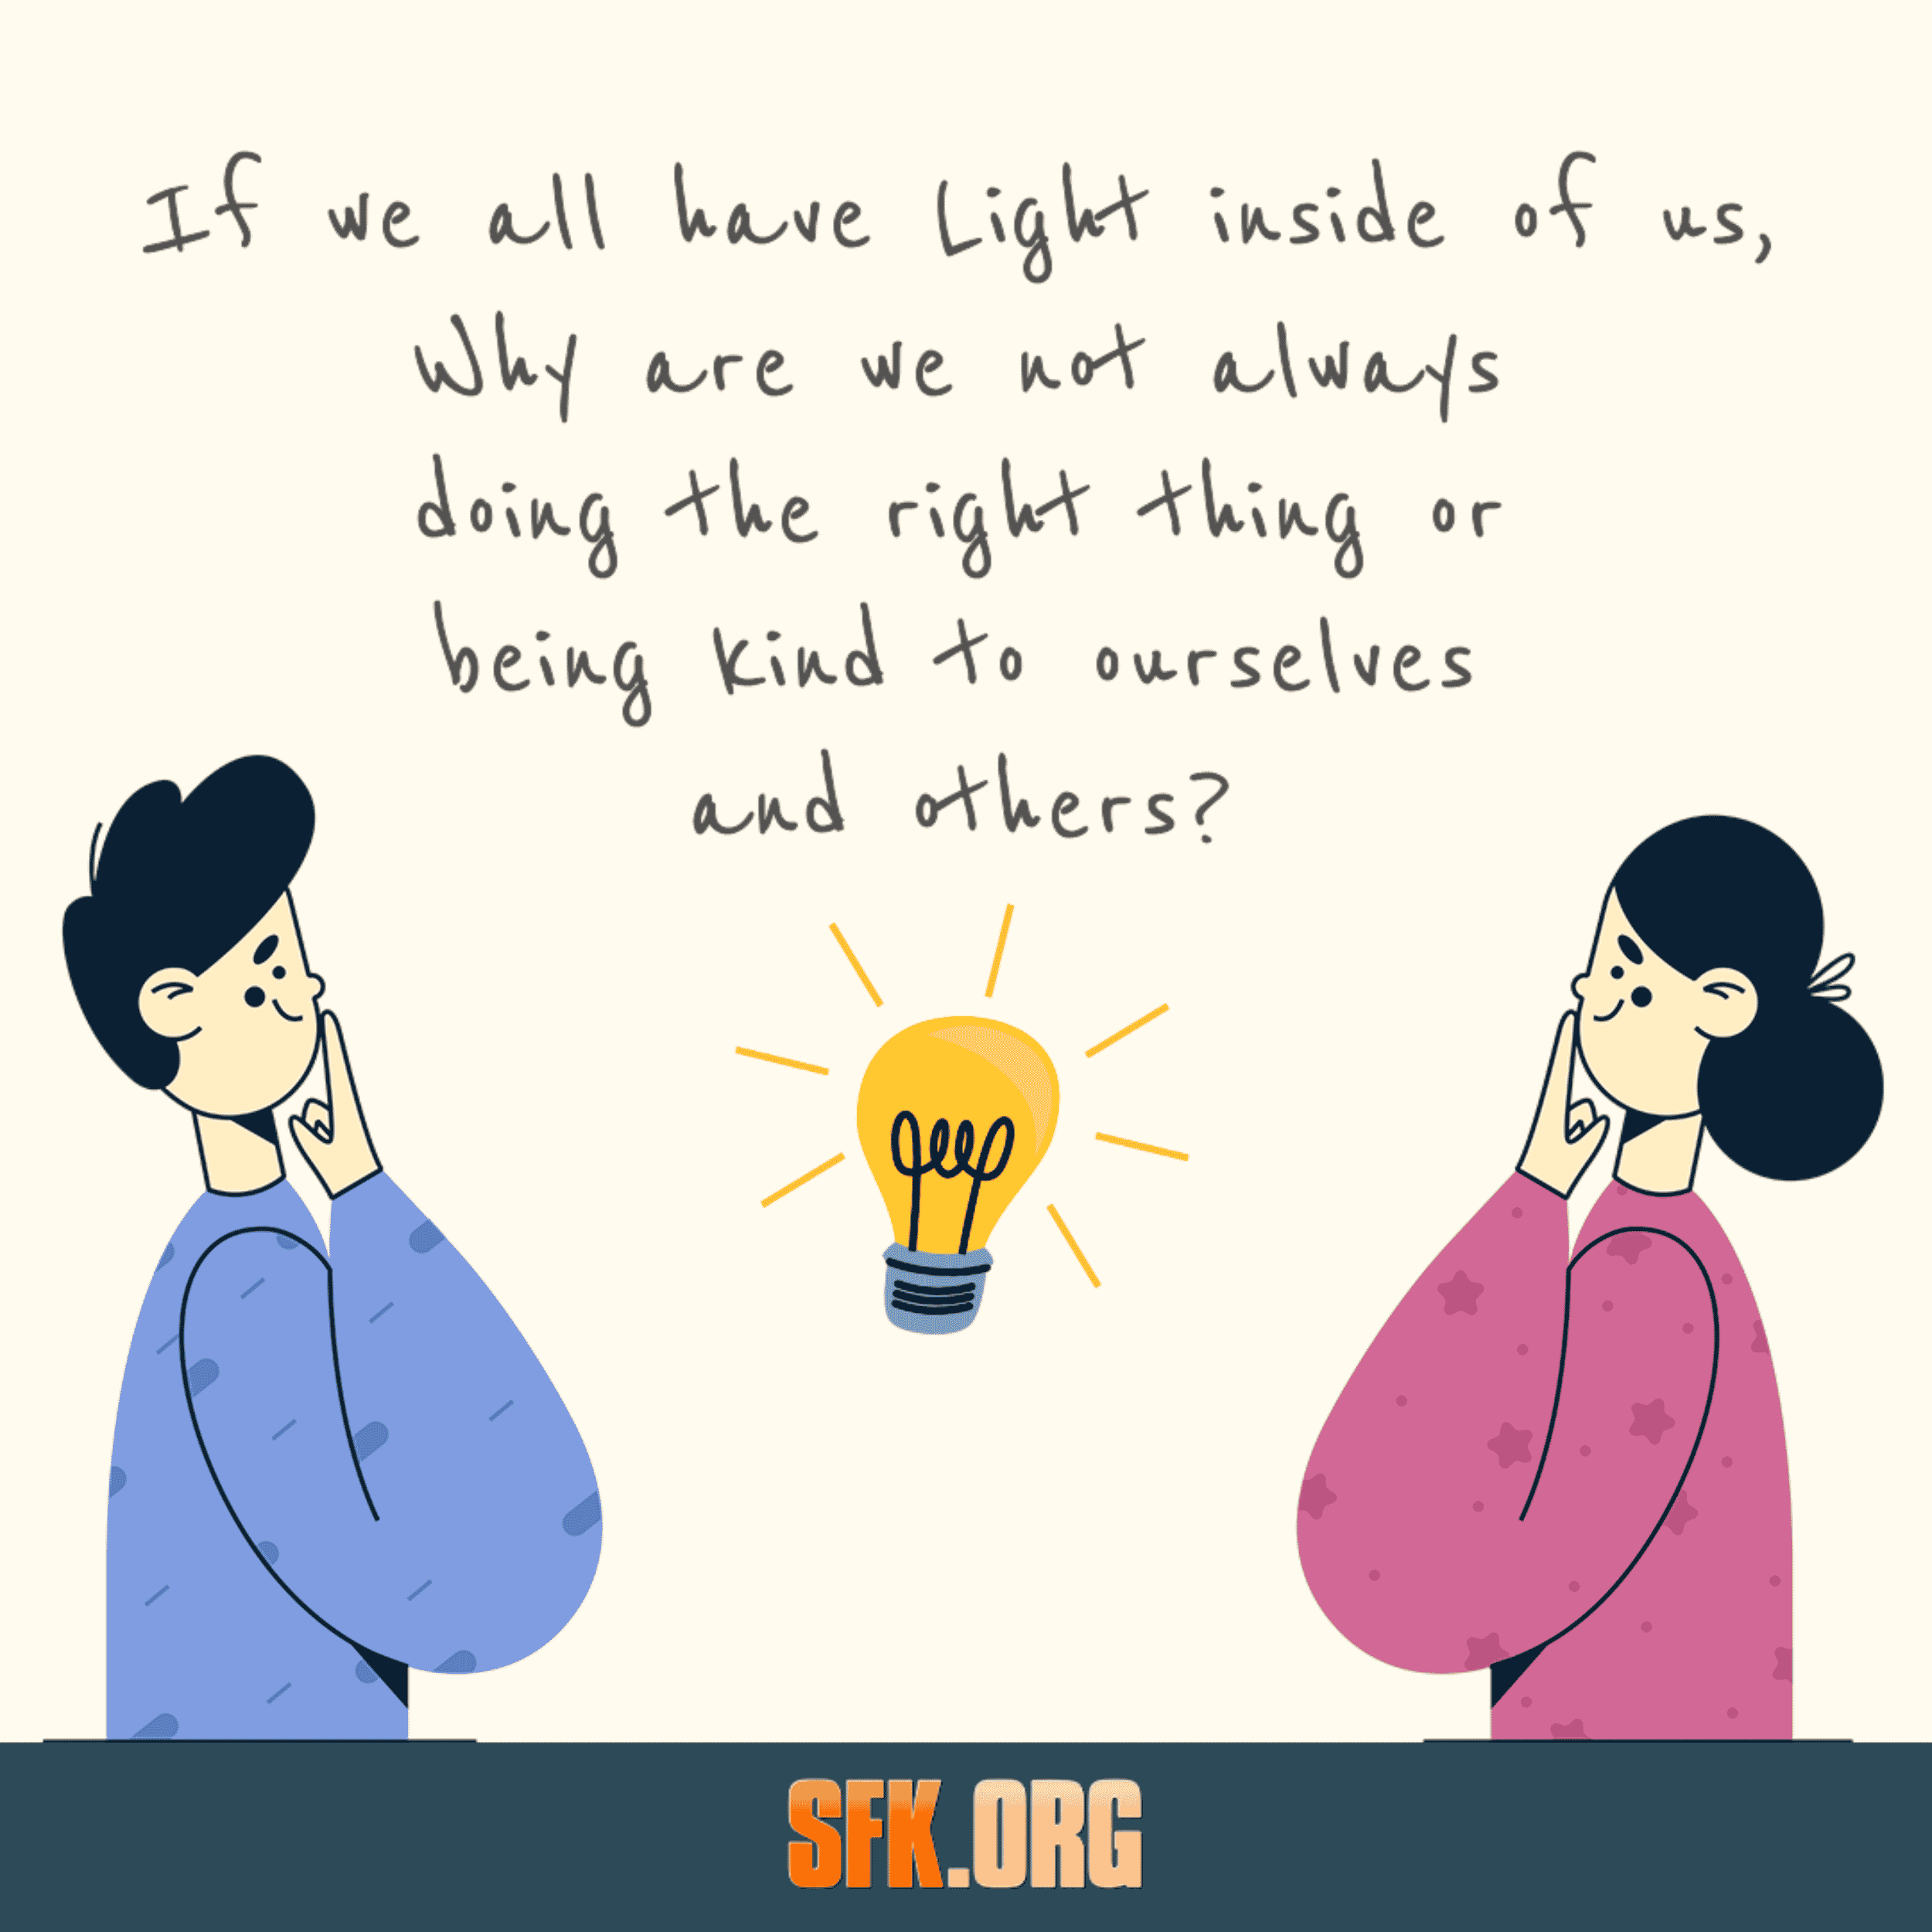 If we all have Light inside of uS, Why are we not always doing the right thing or being kind to ourselves and others?